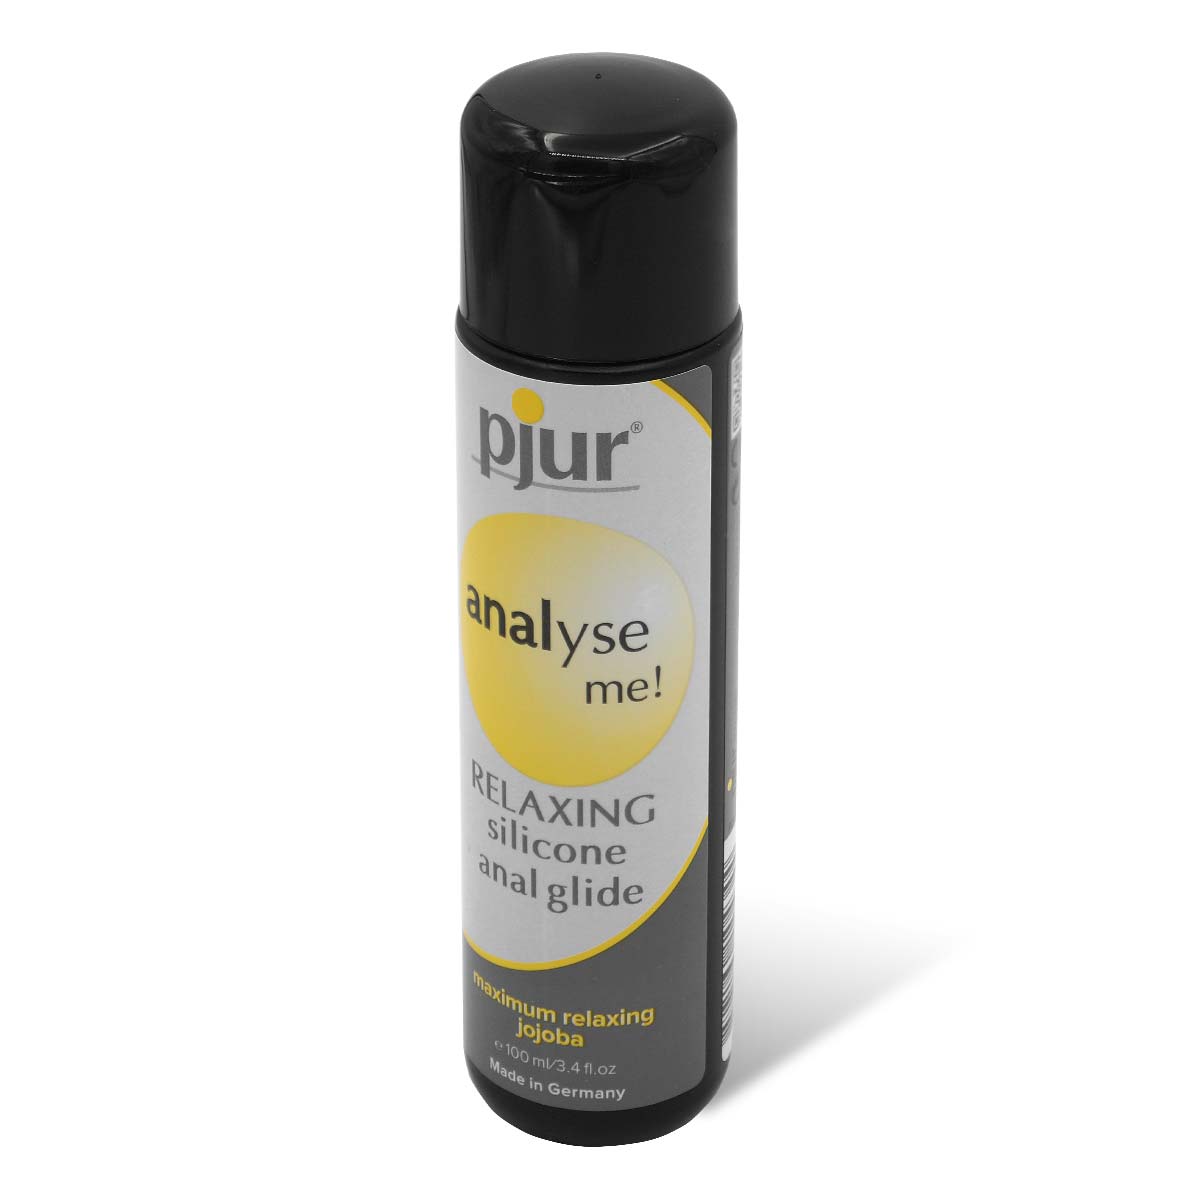 pjur analyse me! RELAXING Silicone Anal Glide 100ml Silicone-based Lubricant (Short Expiry)-p_1